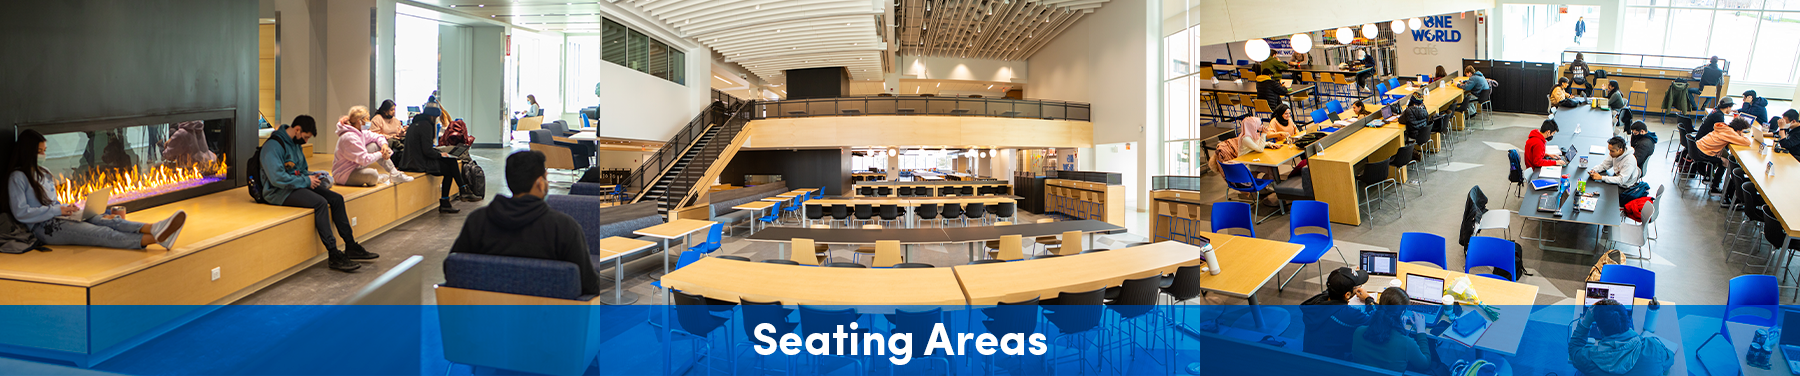 Seating areas